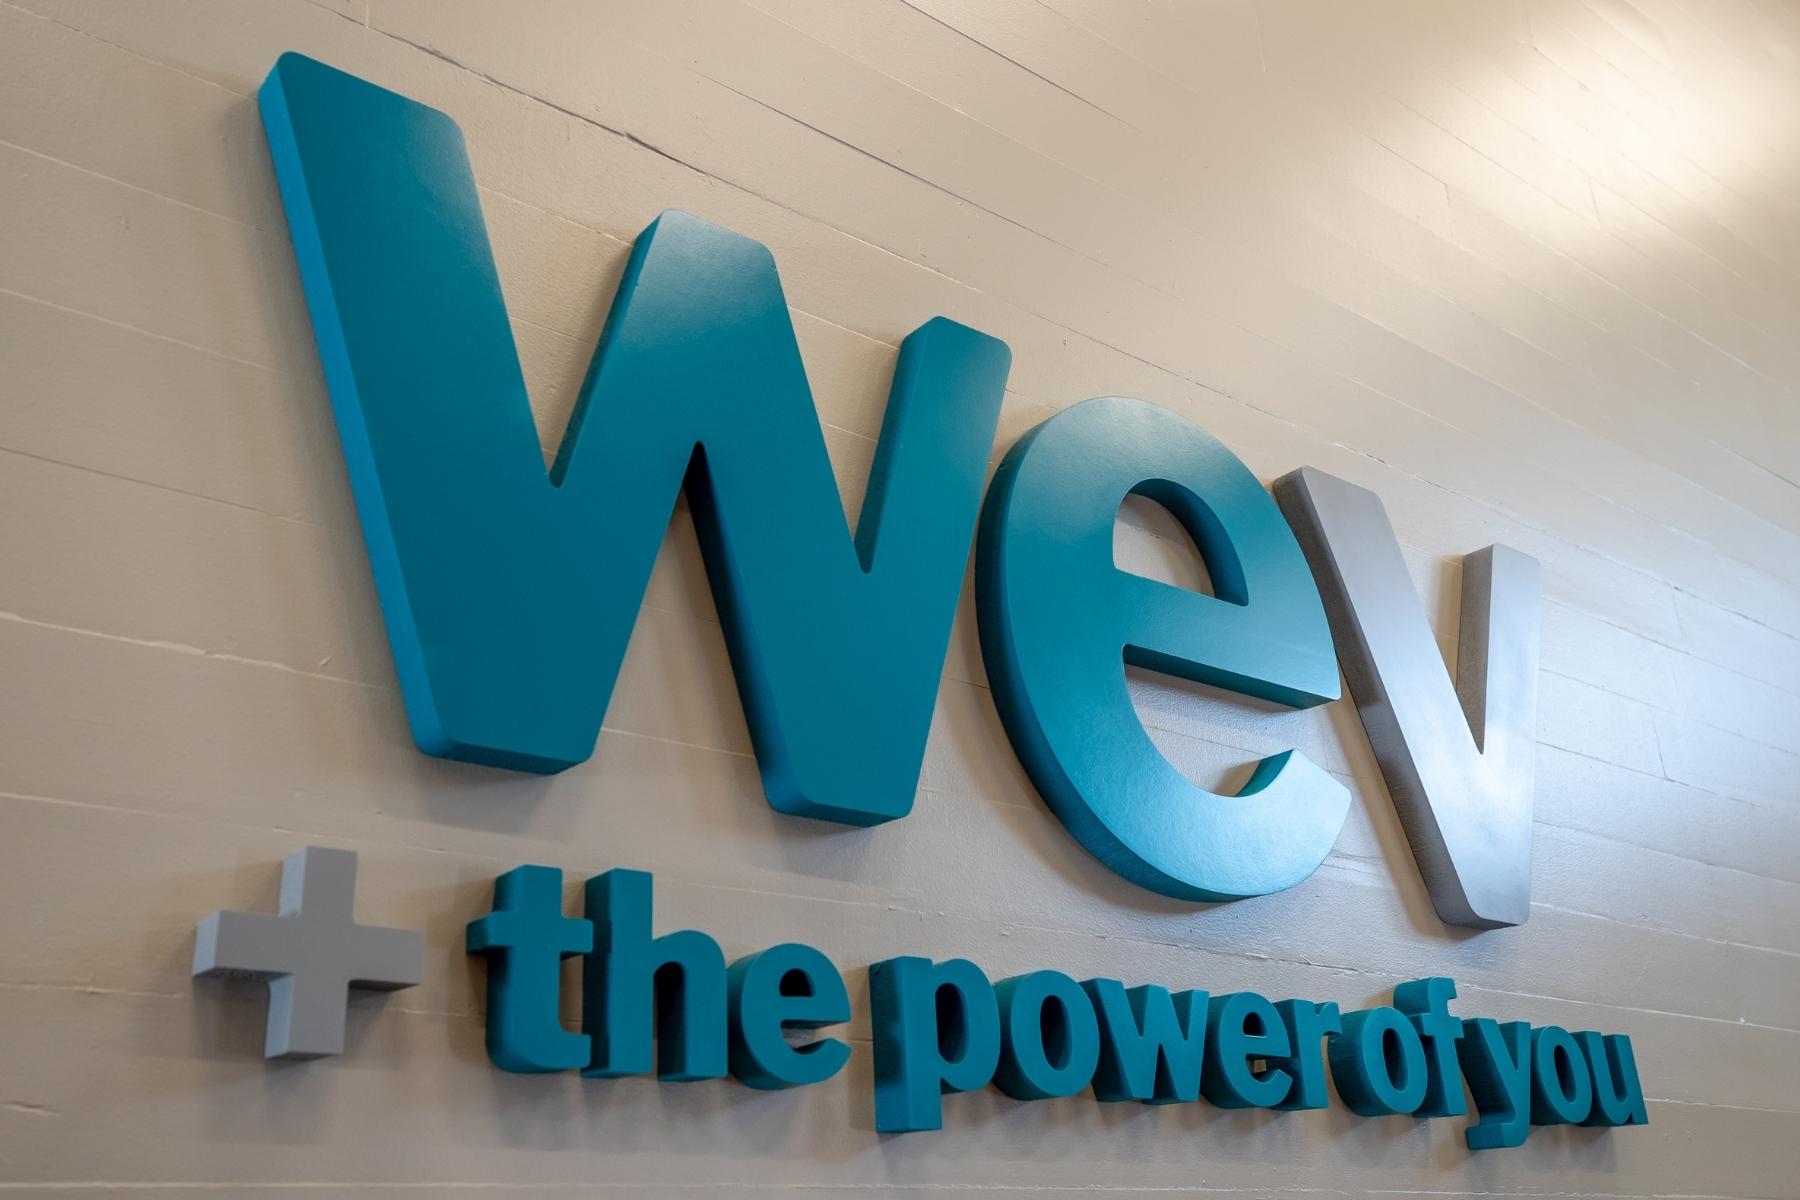 Logo on the wall in the Santa Barbara Community Center states WEV + the Power of You